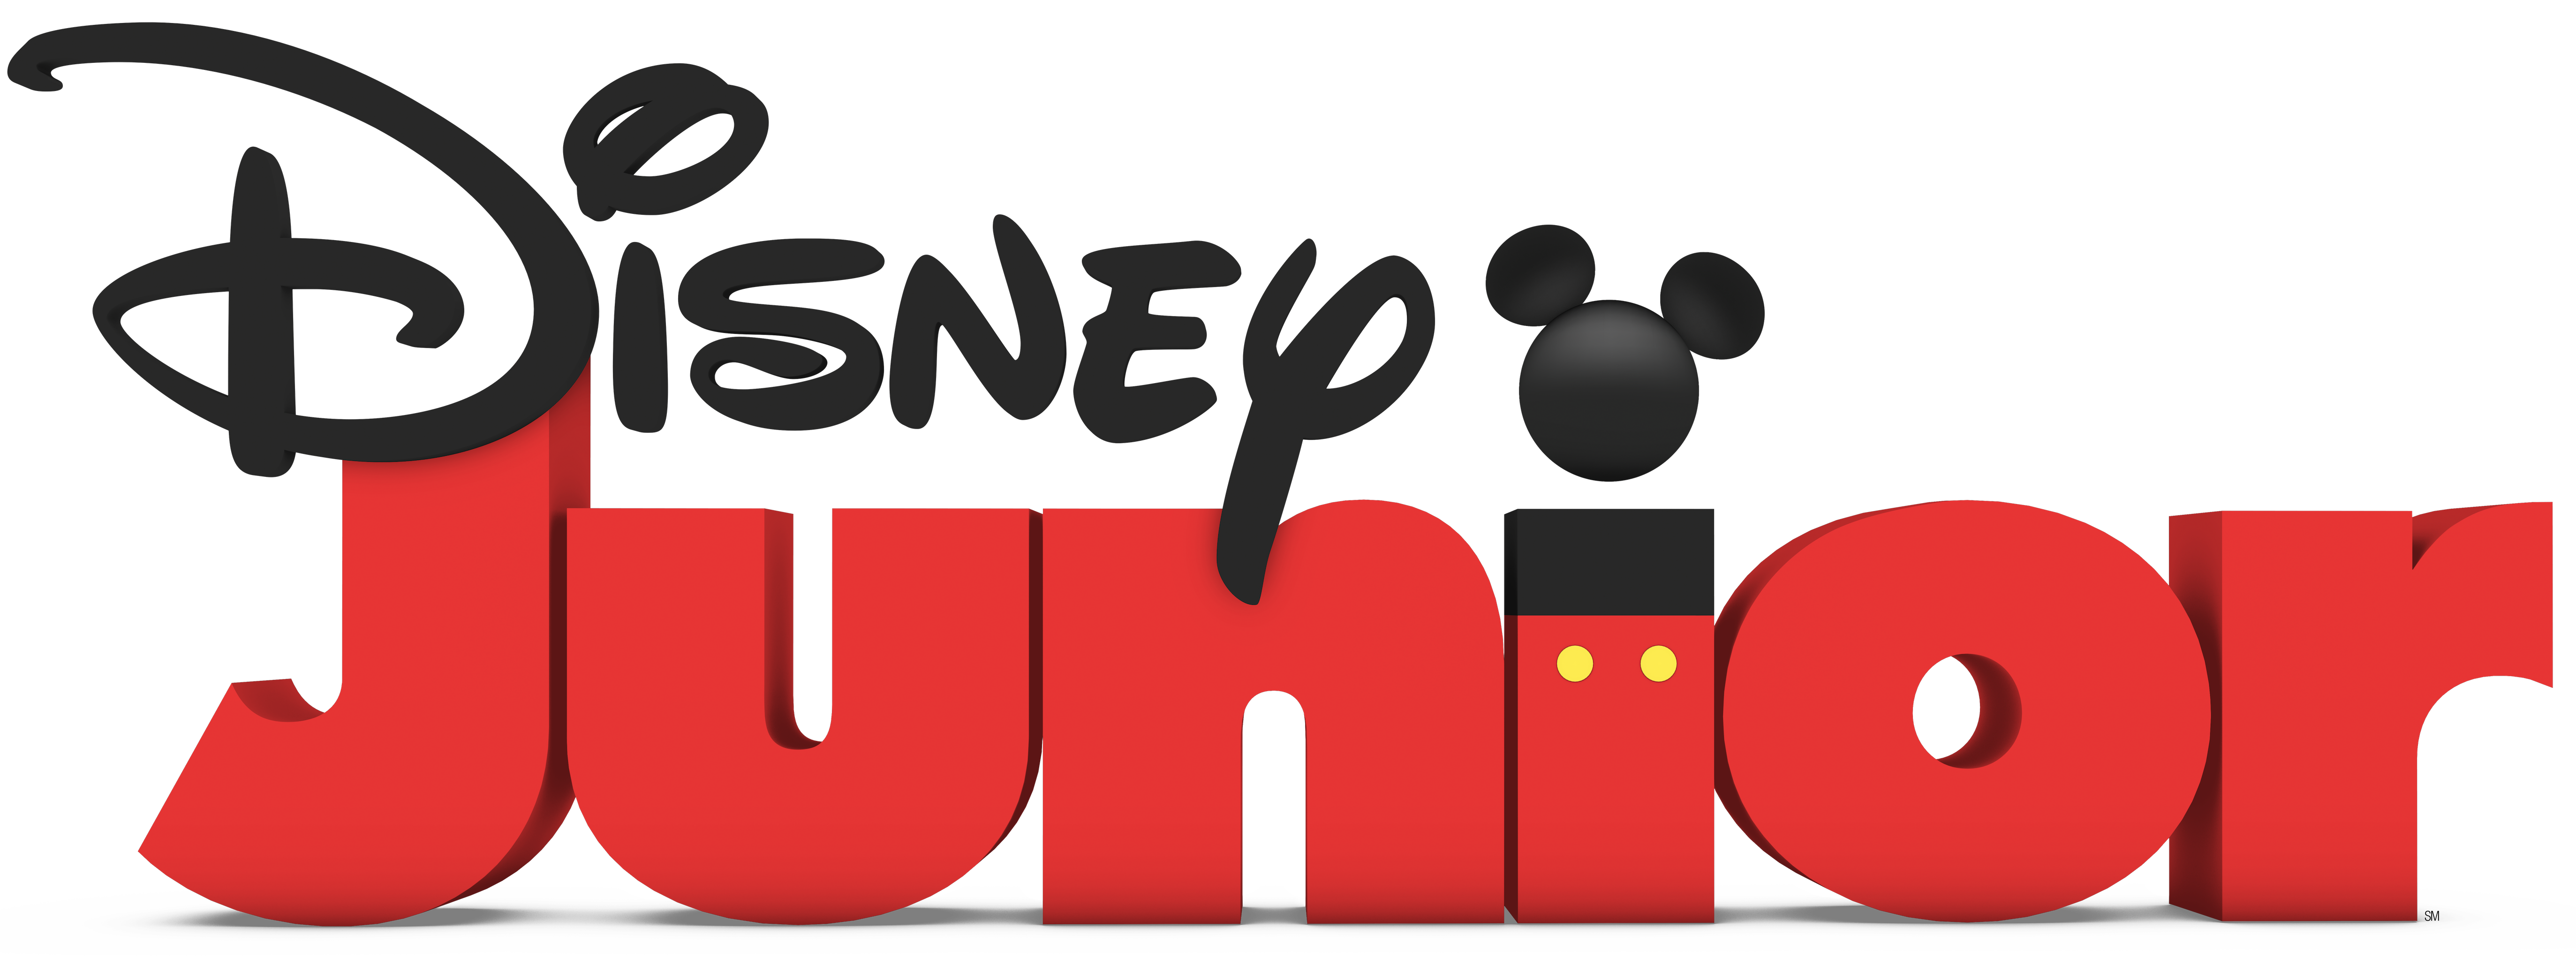 https://static.wikia.nocookie.net/logopedia/images/7/7f/Disney_Junior_Logo_2020.png/revision/latest?cb=20201007202007